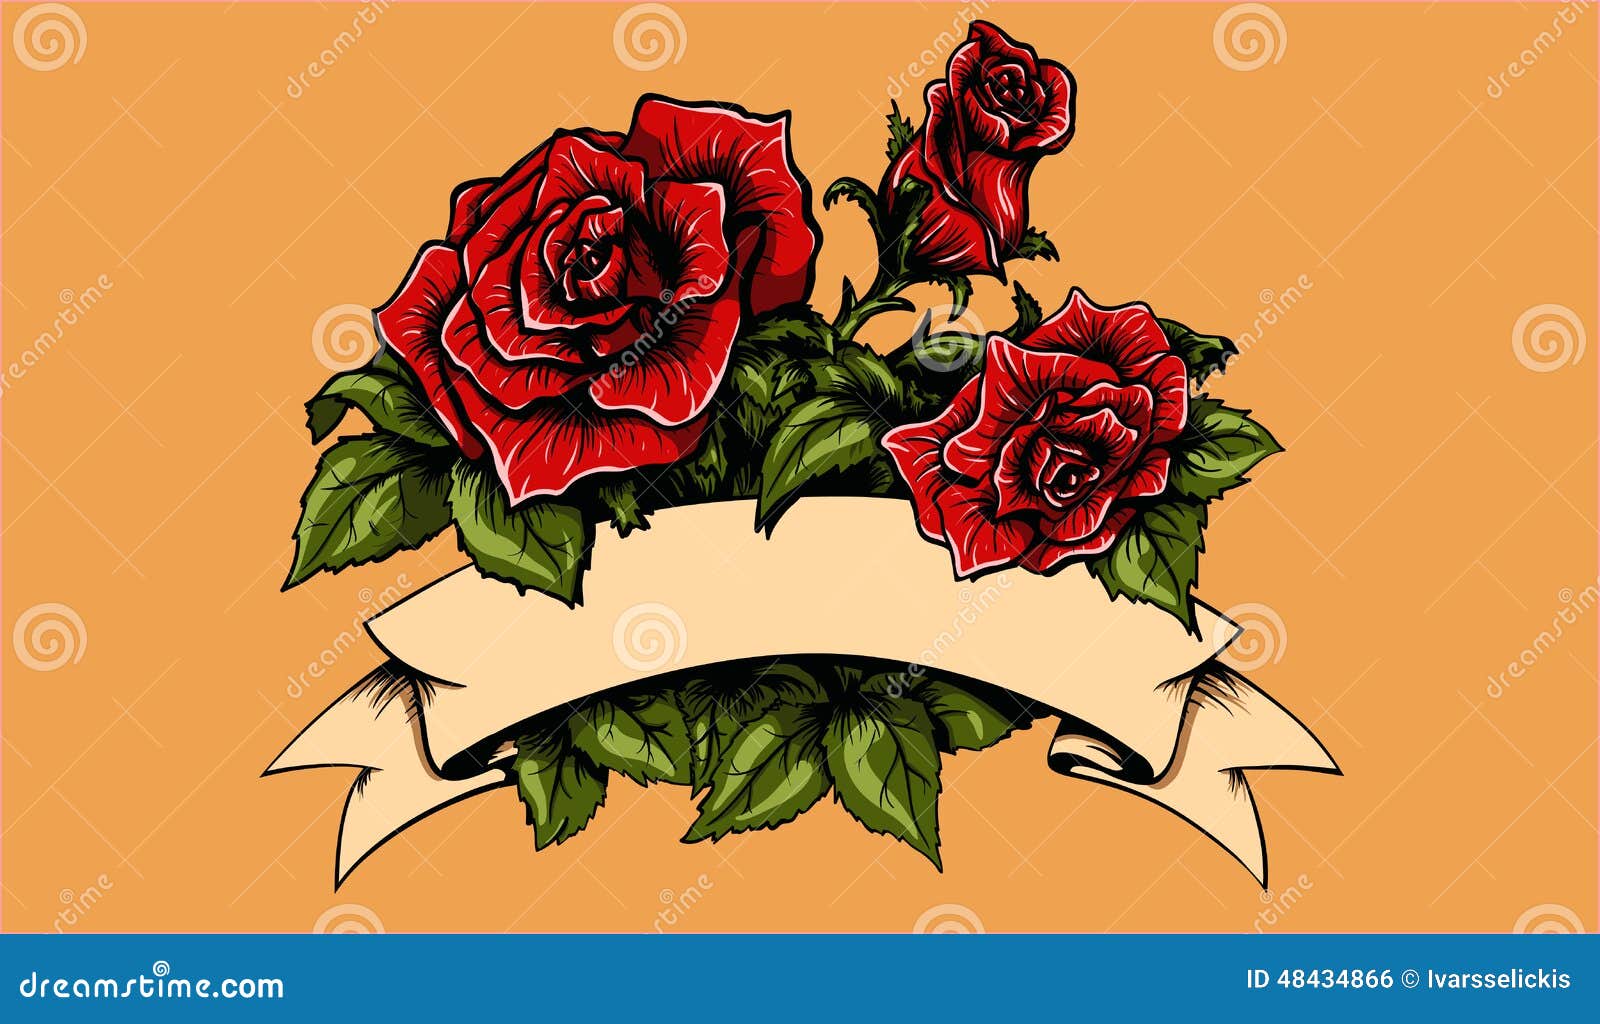 Premium Vector  Skull tattoo with rose and banner